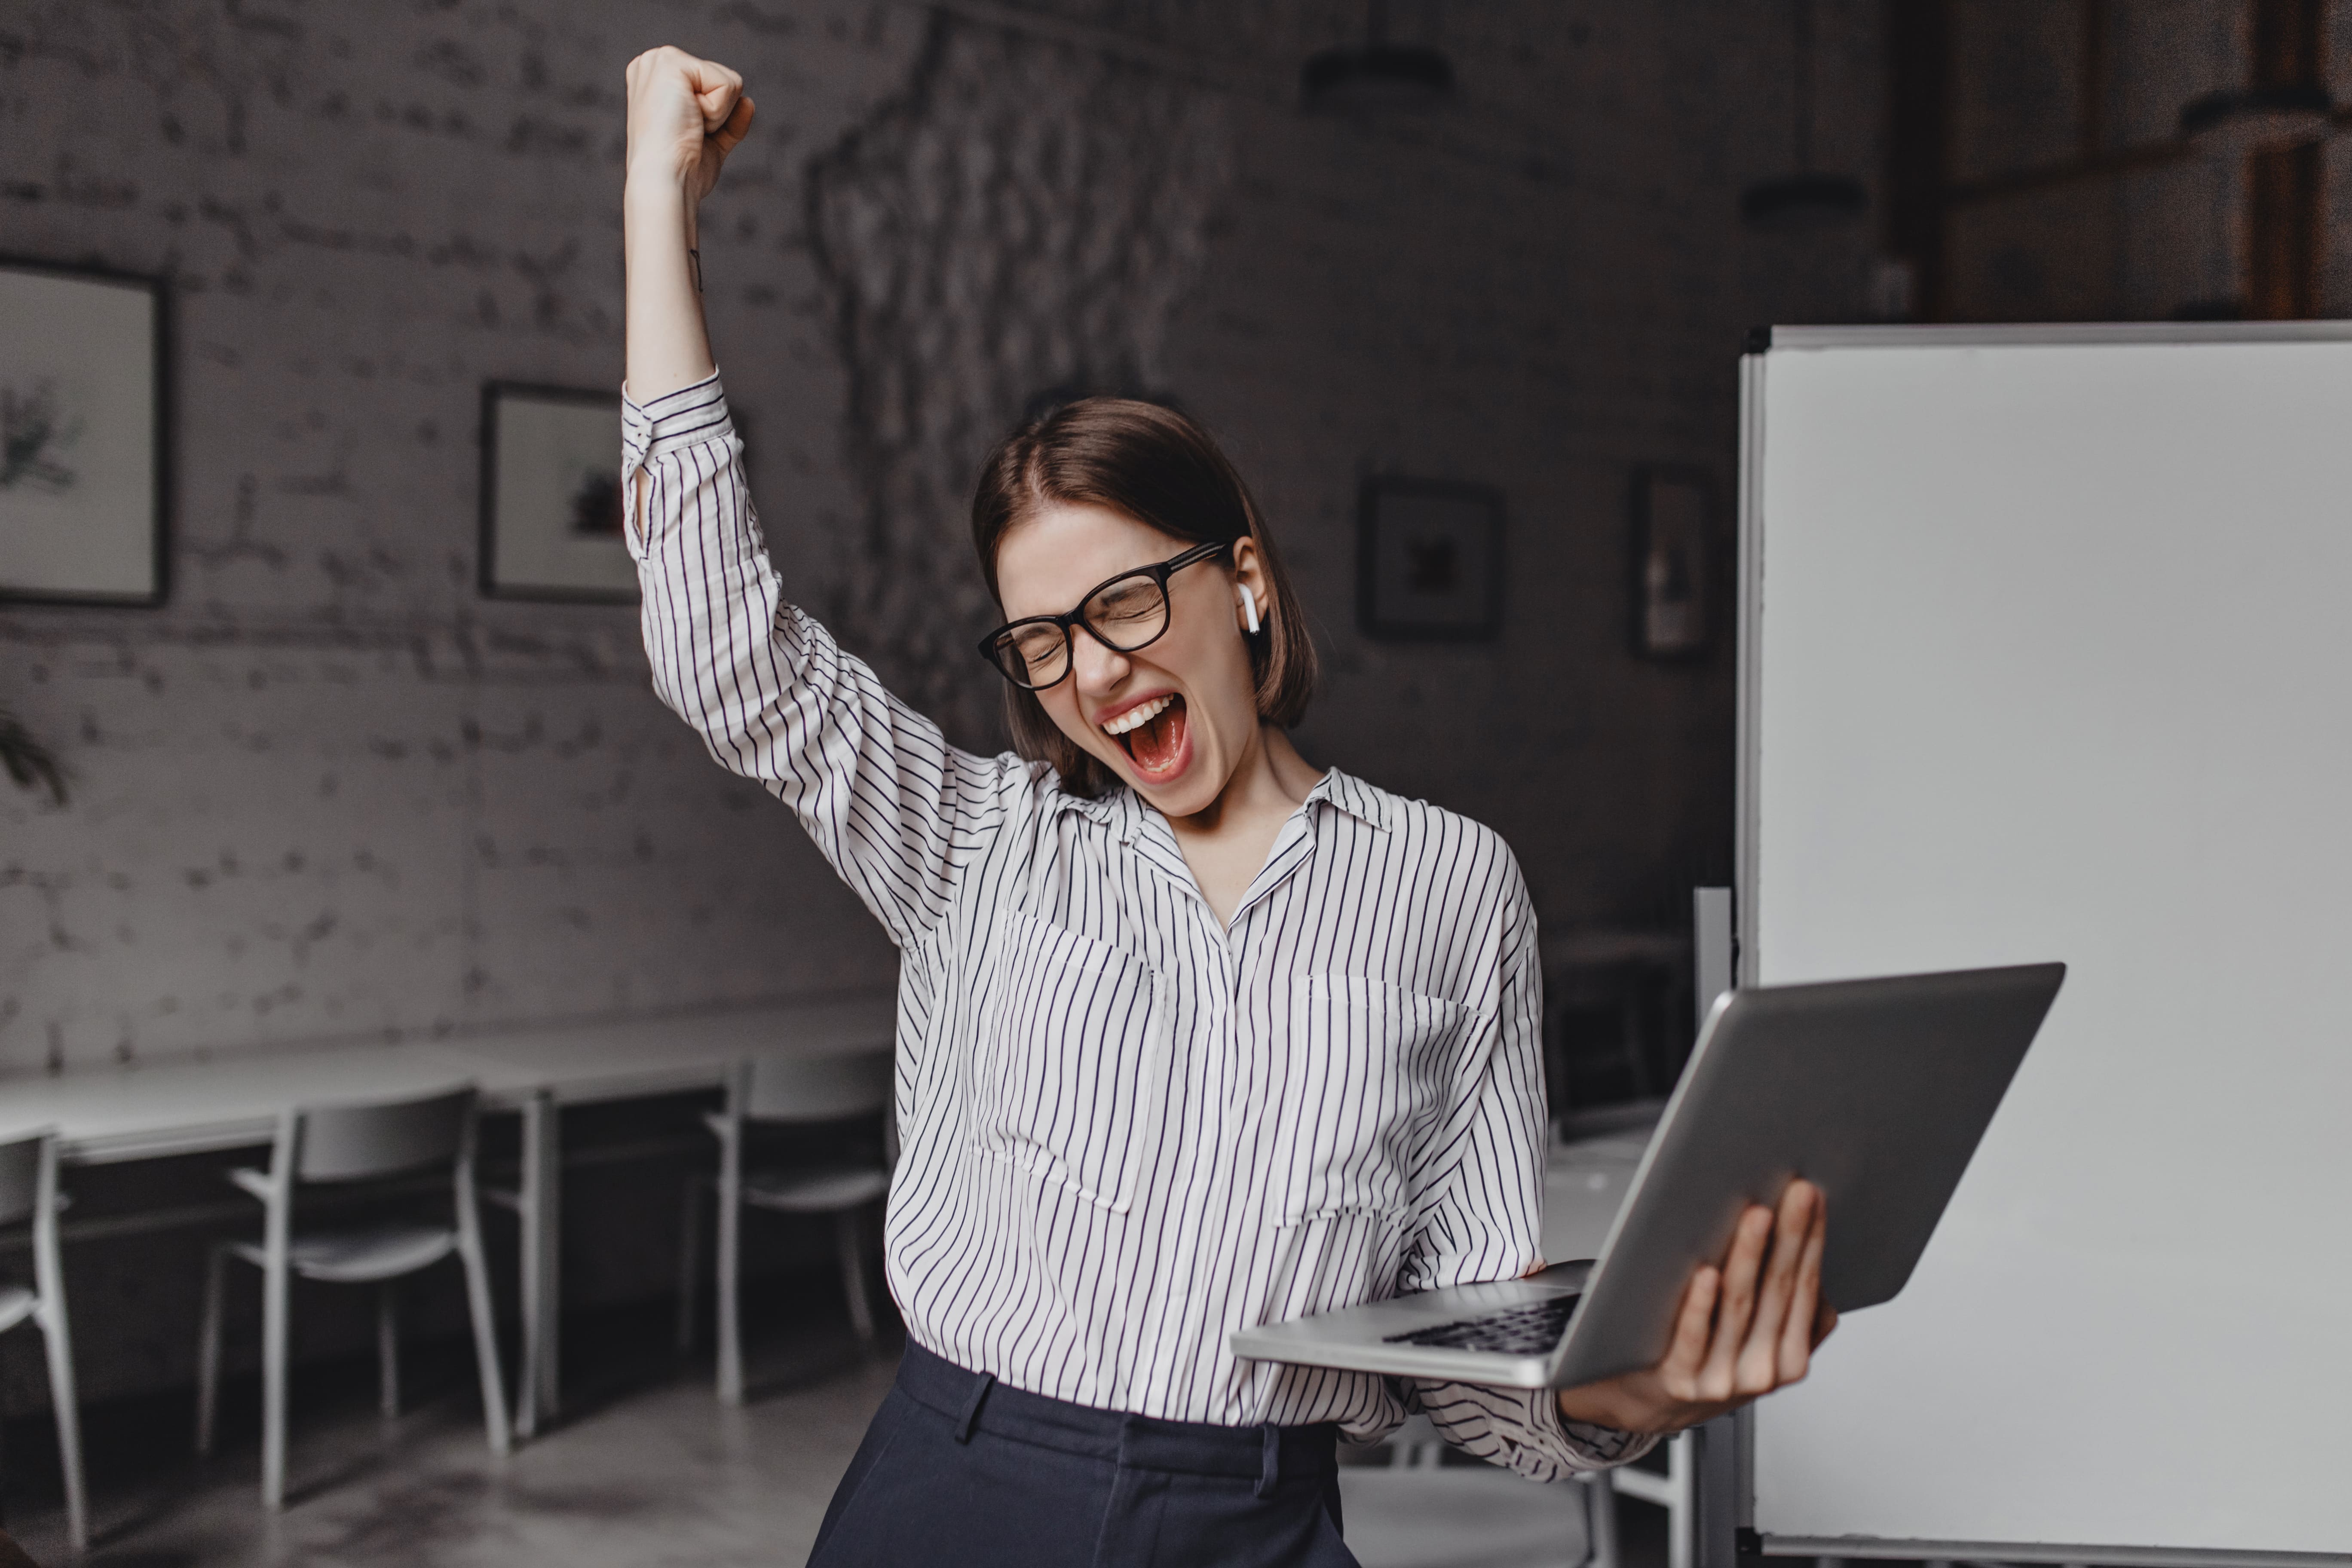 business-woman-with-laptop-in-hand-is-happy-with-success-portrait-of-woman-in-glasses-and-striped-blouse-enthusiastically-screaming-and-making-winning-gesture _1_